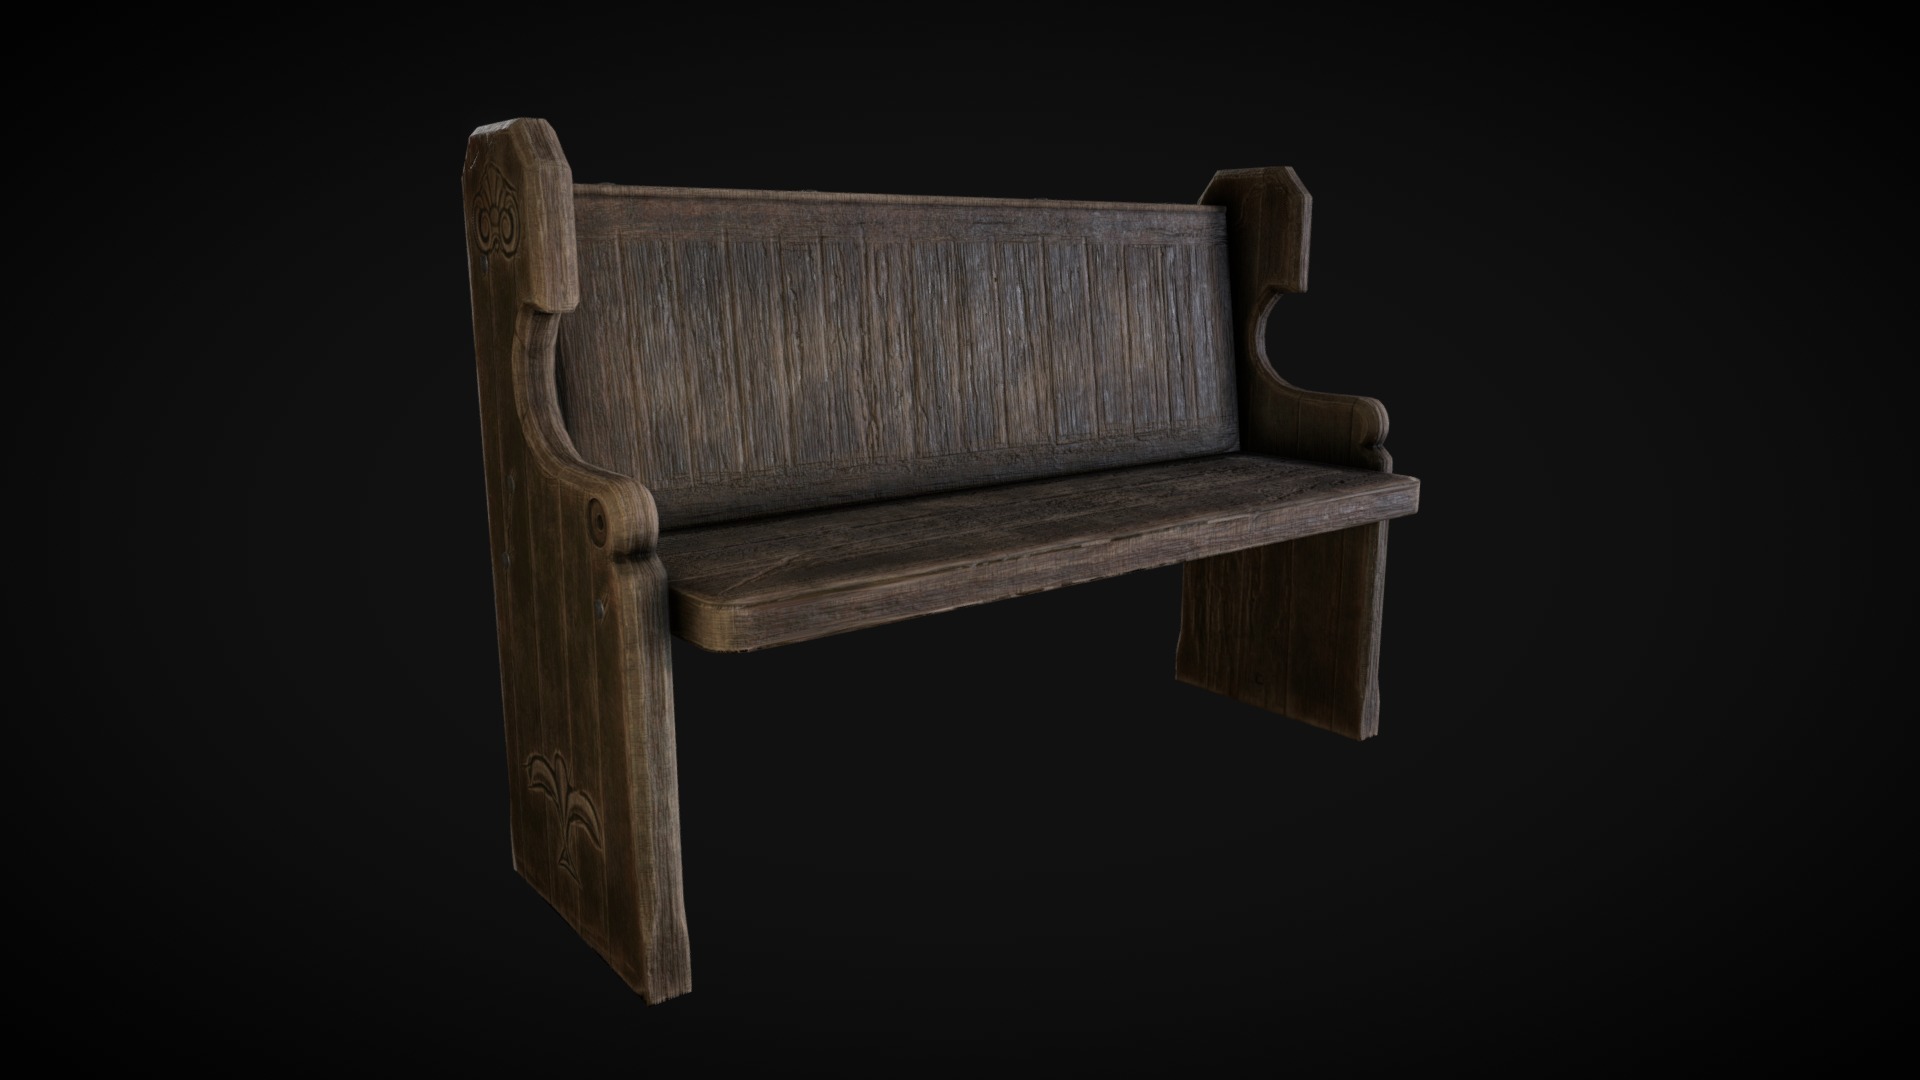 A Church Pew i made as part of a bigger project
4k PBR textures - Church Pew Bench - Buy Royalty Free 3D model by Deftroy 3d model